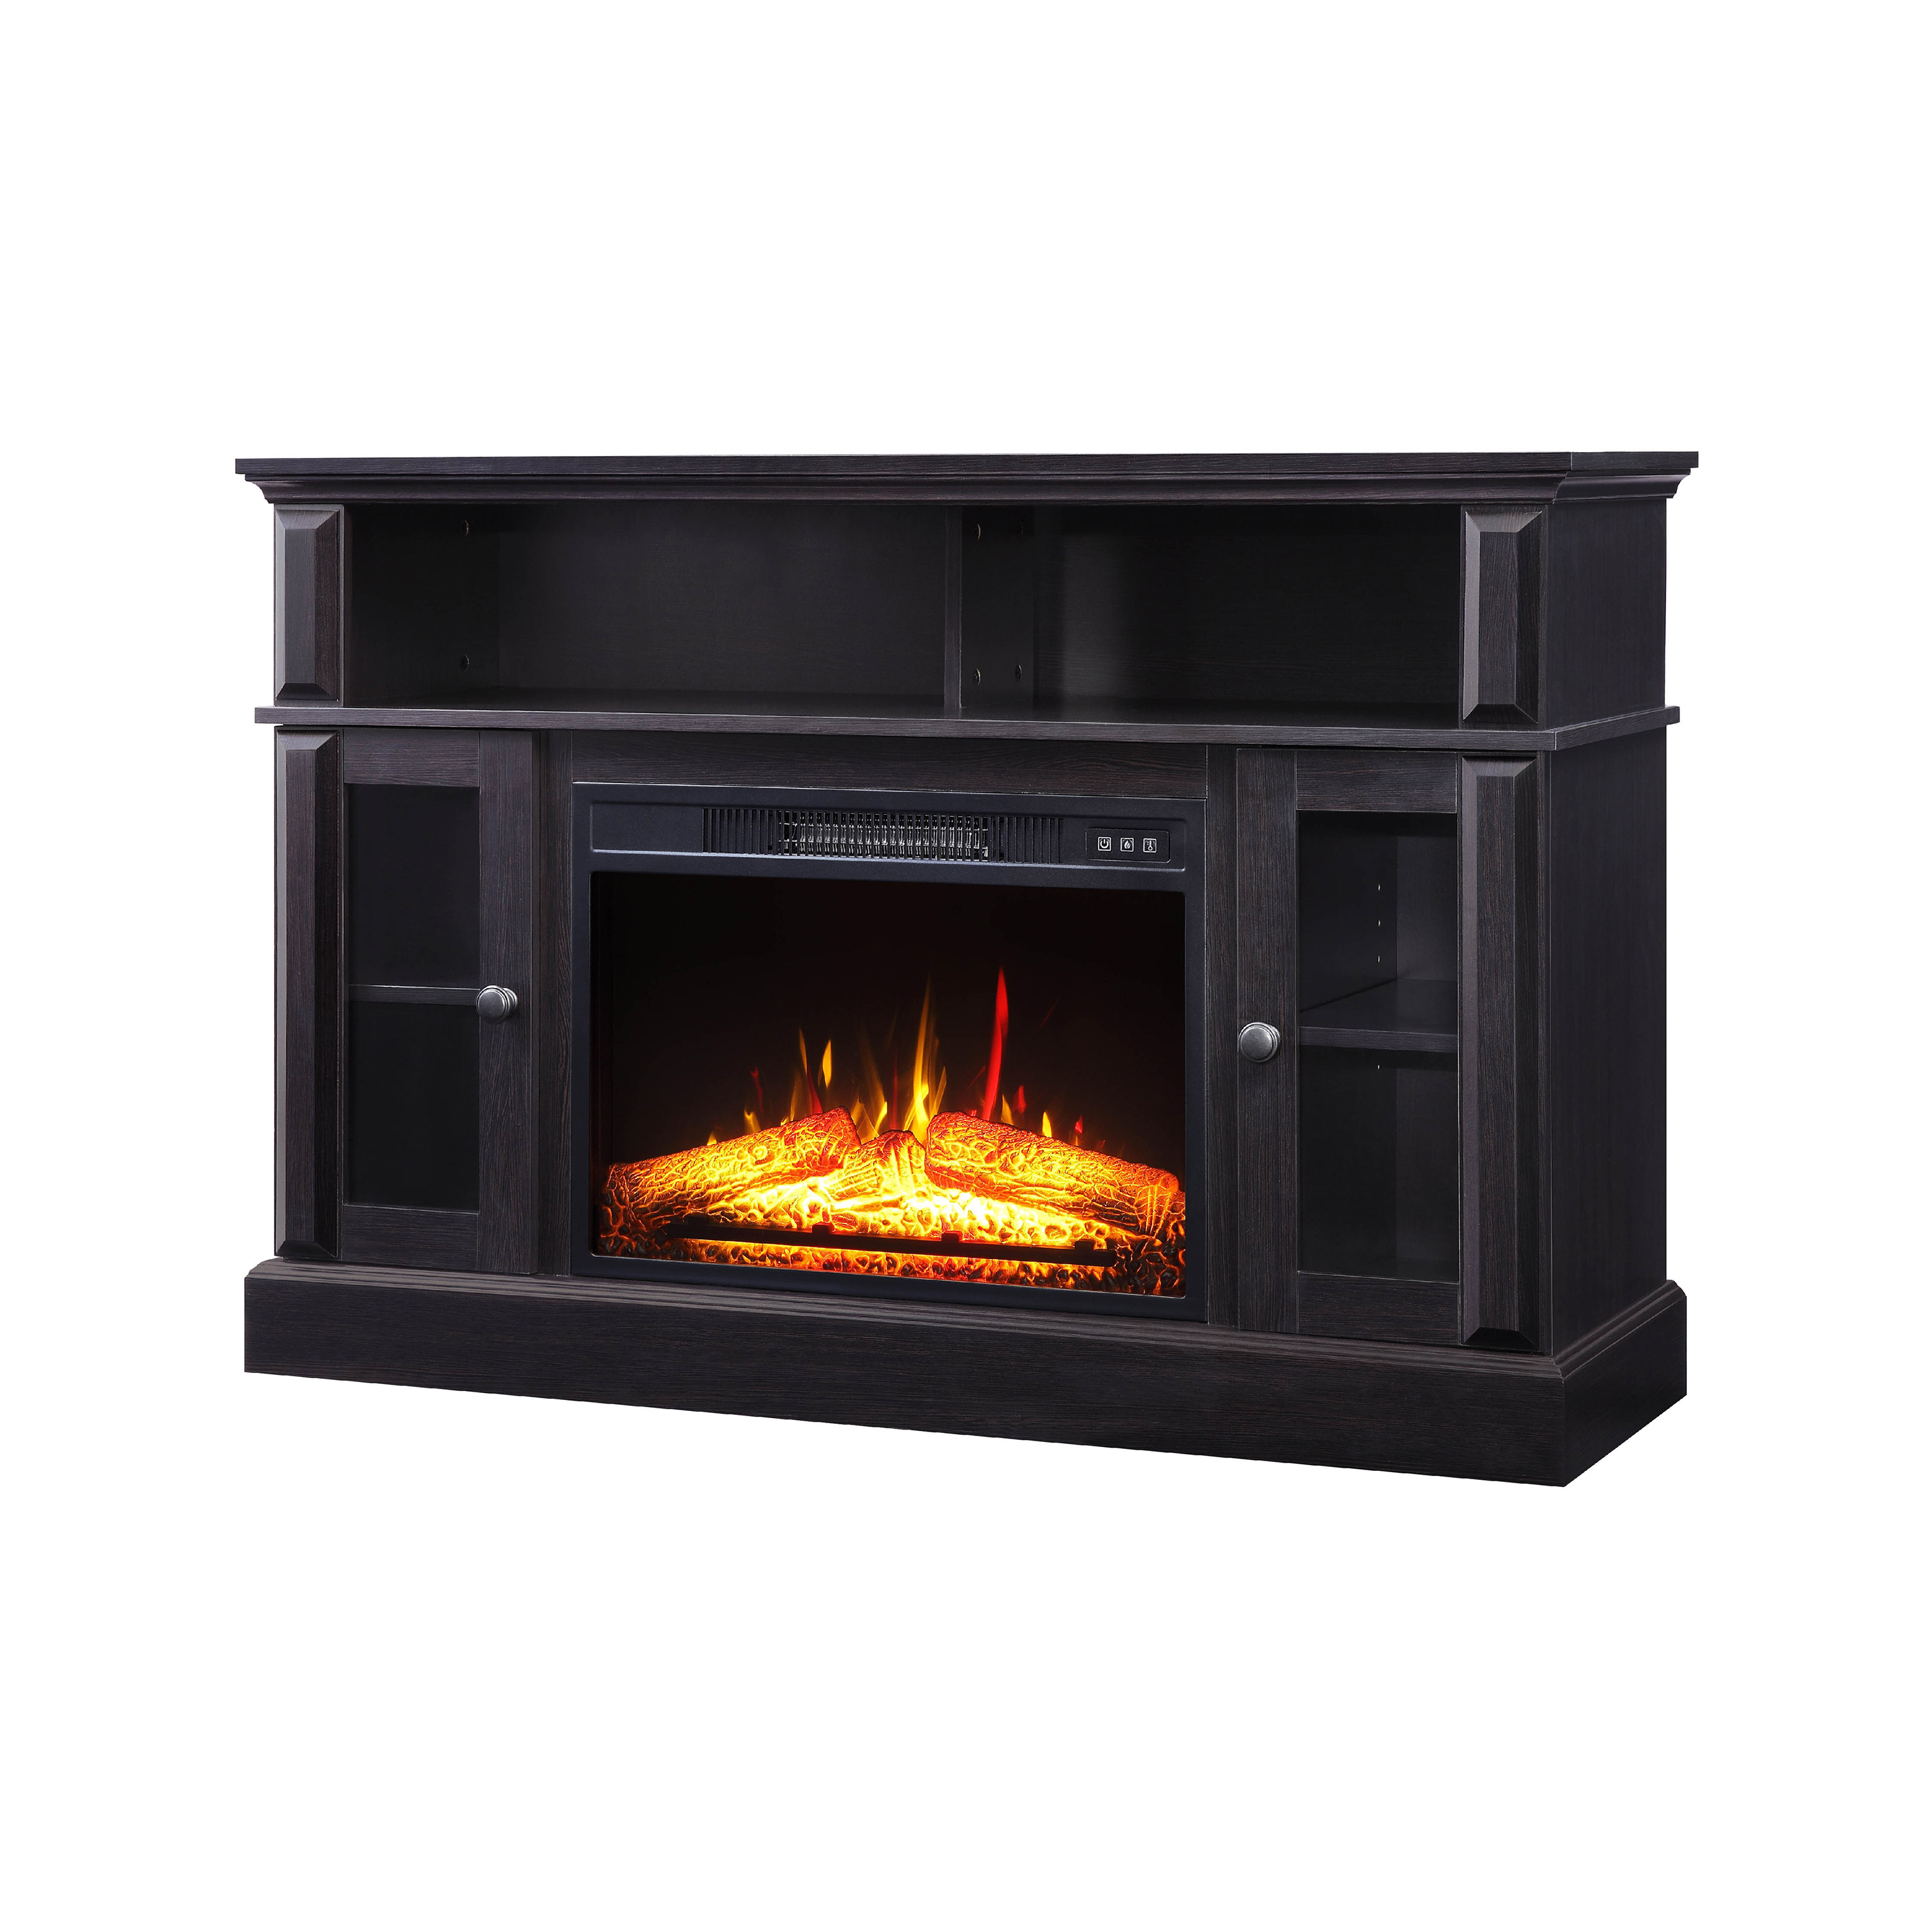 Whalen Barston Media Fireplace Console for TV's up to 55”, Espresso Finish - image 2 of 11